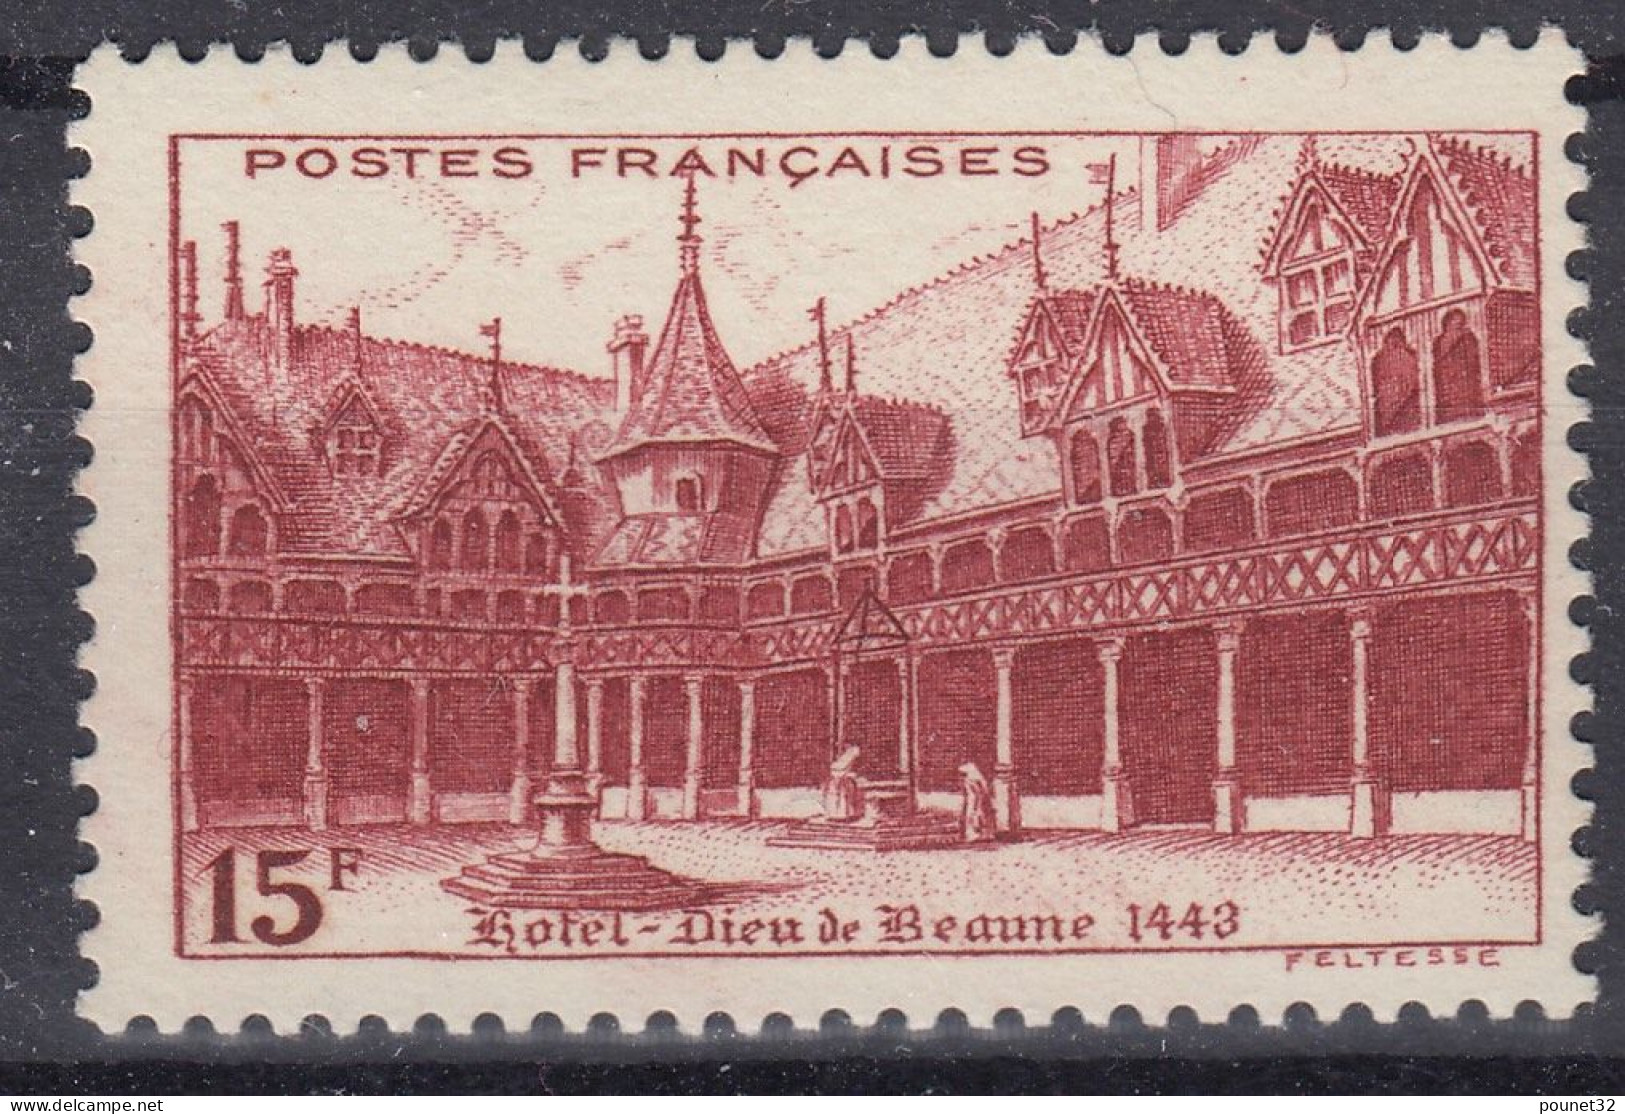 TIMBRE FRANCE HOTEL DIEU BEAUNE N° 539b PAPIER CARTON NEUF ** GOMME SANS CHARNIERE - Unused Stamps